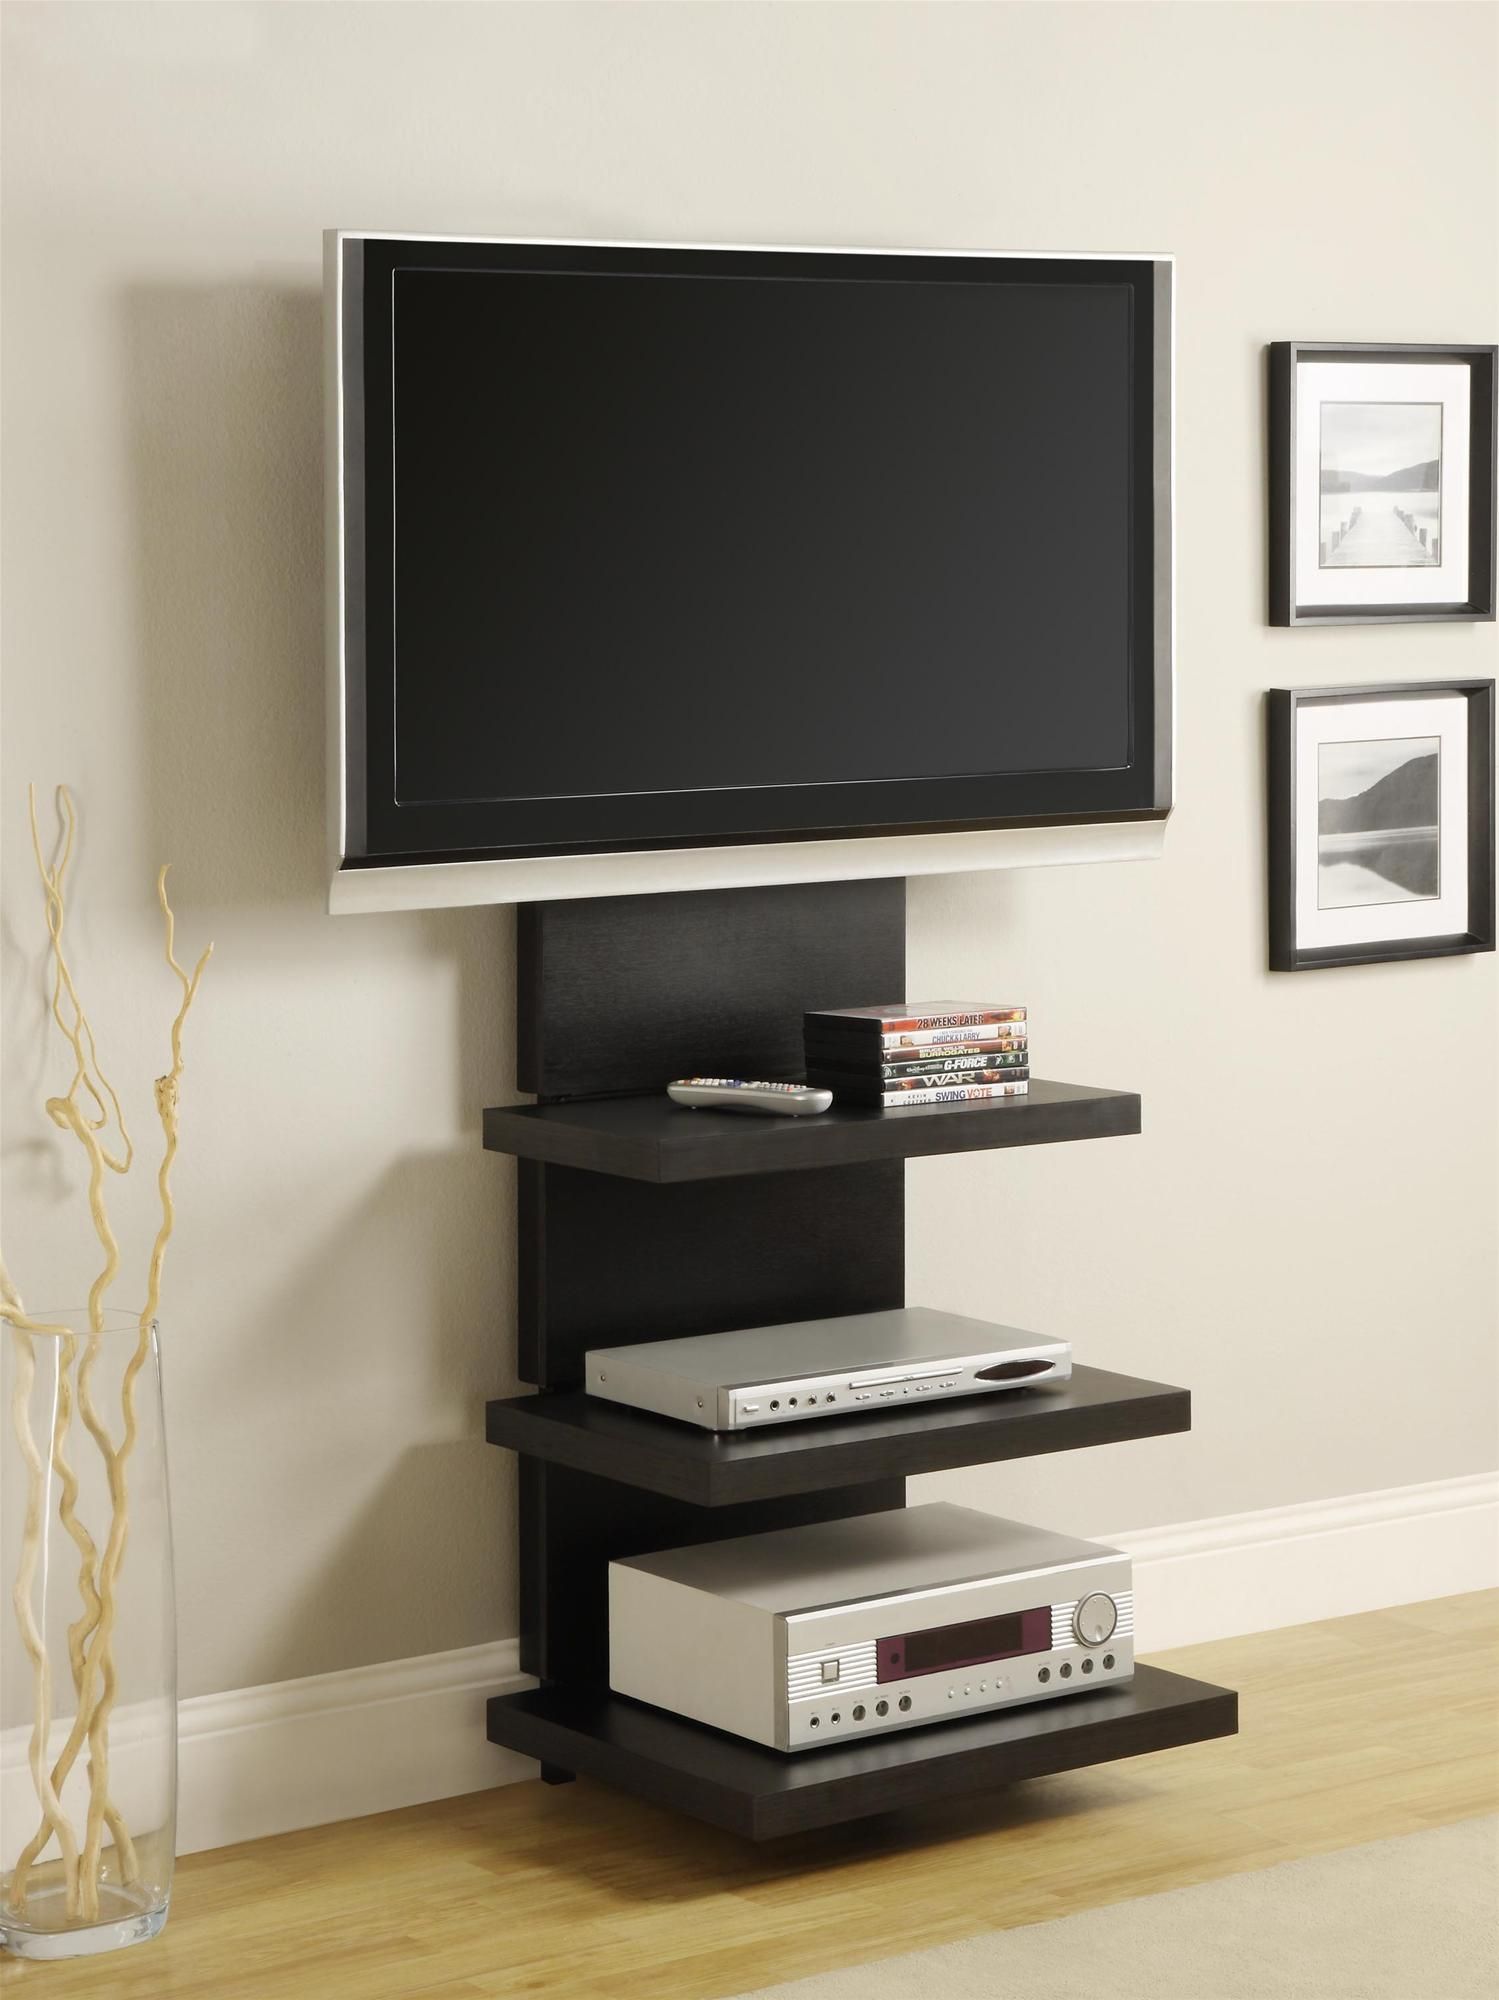 Wall Mount Tv Stand With 3 Shelves, Black, For Tvs Up To Pertaining To Console Under Wall Mounted Tv (View 5 of 15)